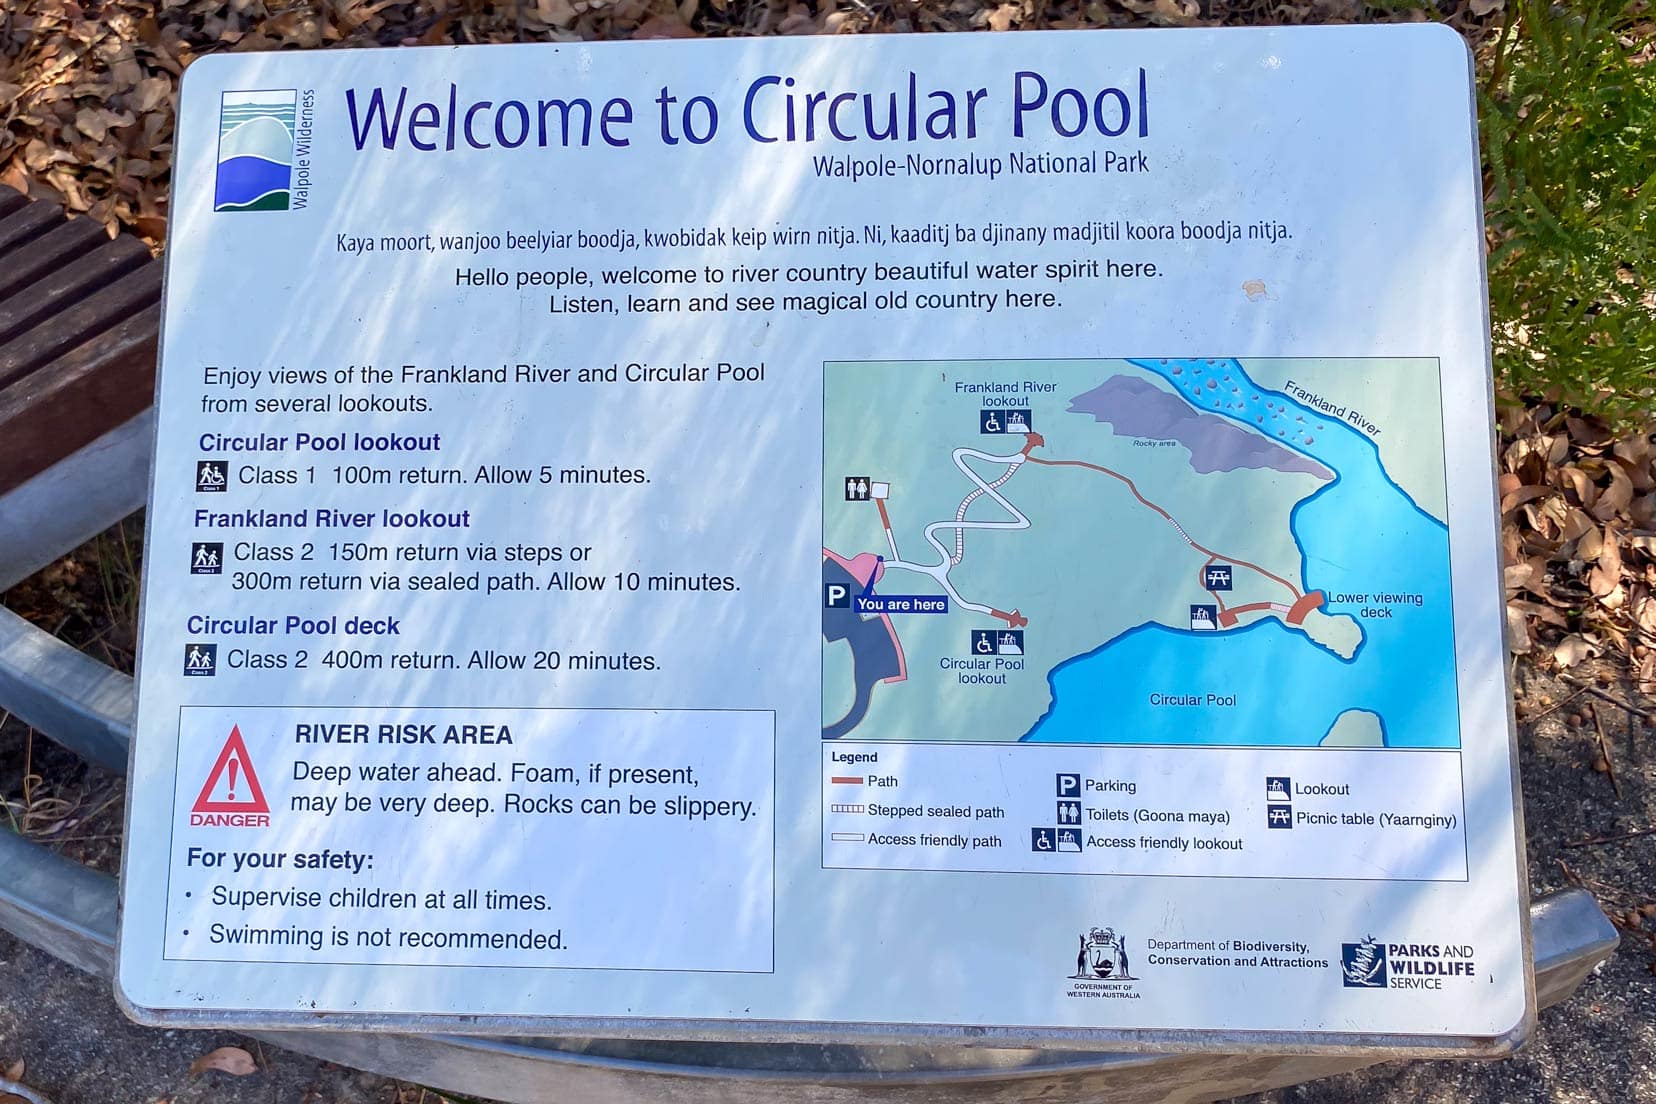 Circular Pool welcome sign with a map 